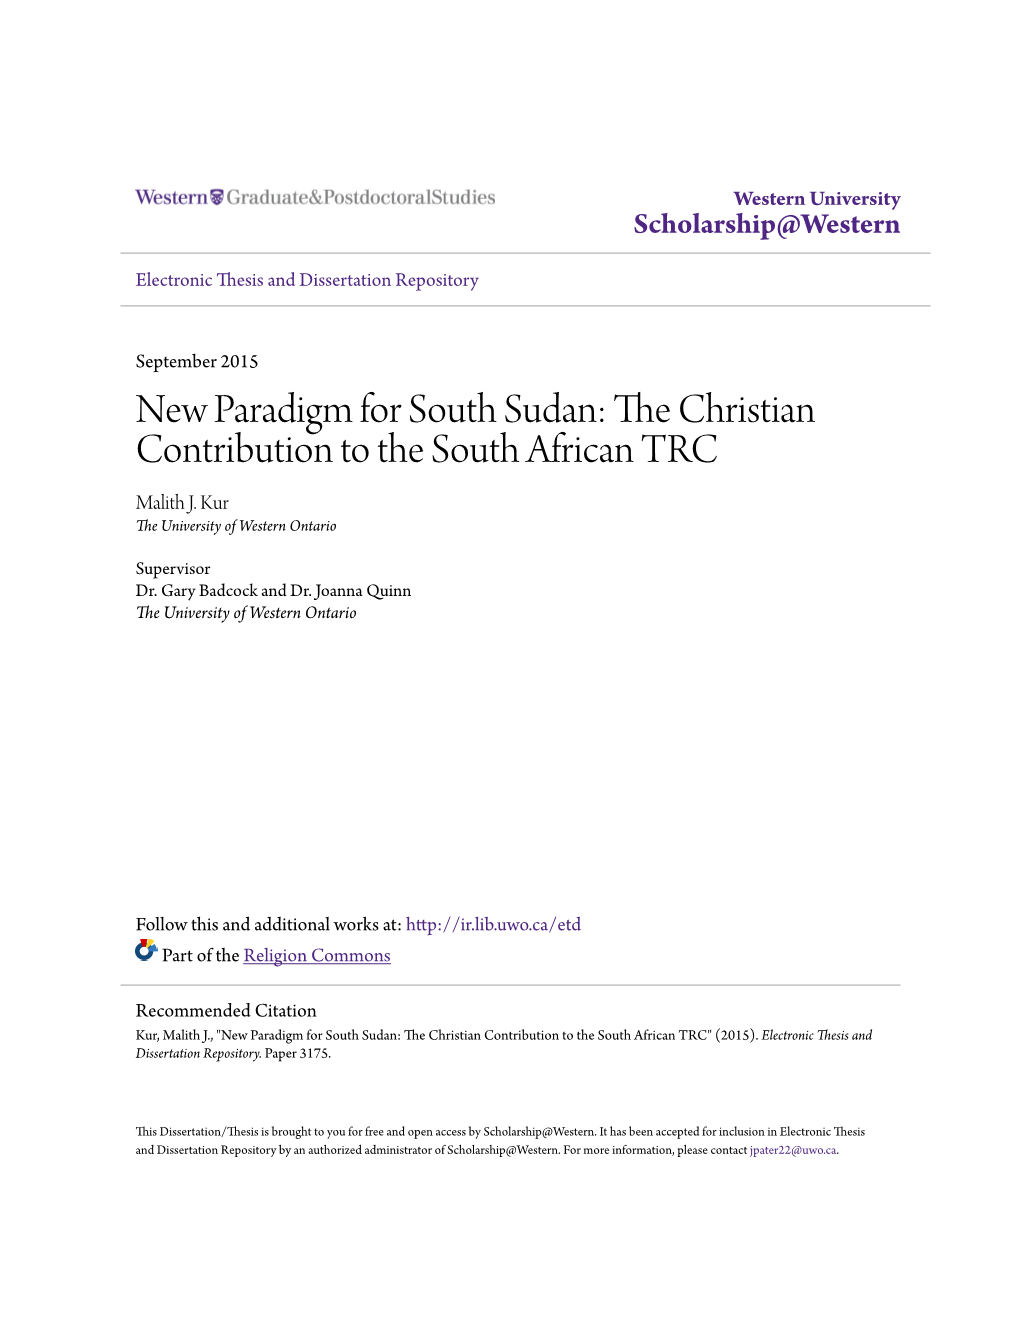 The Christian Contribution to the South African TRC